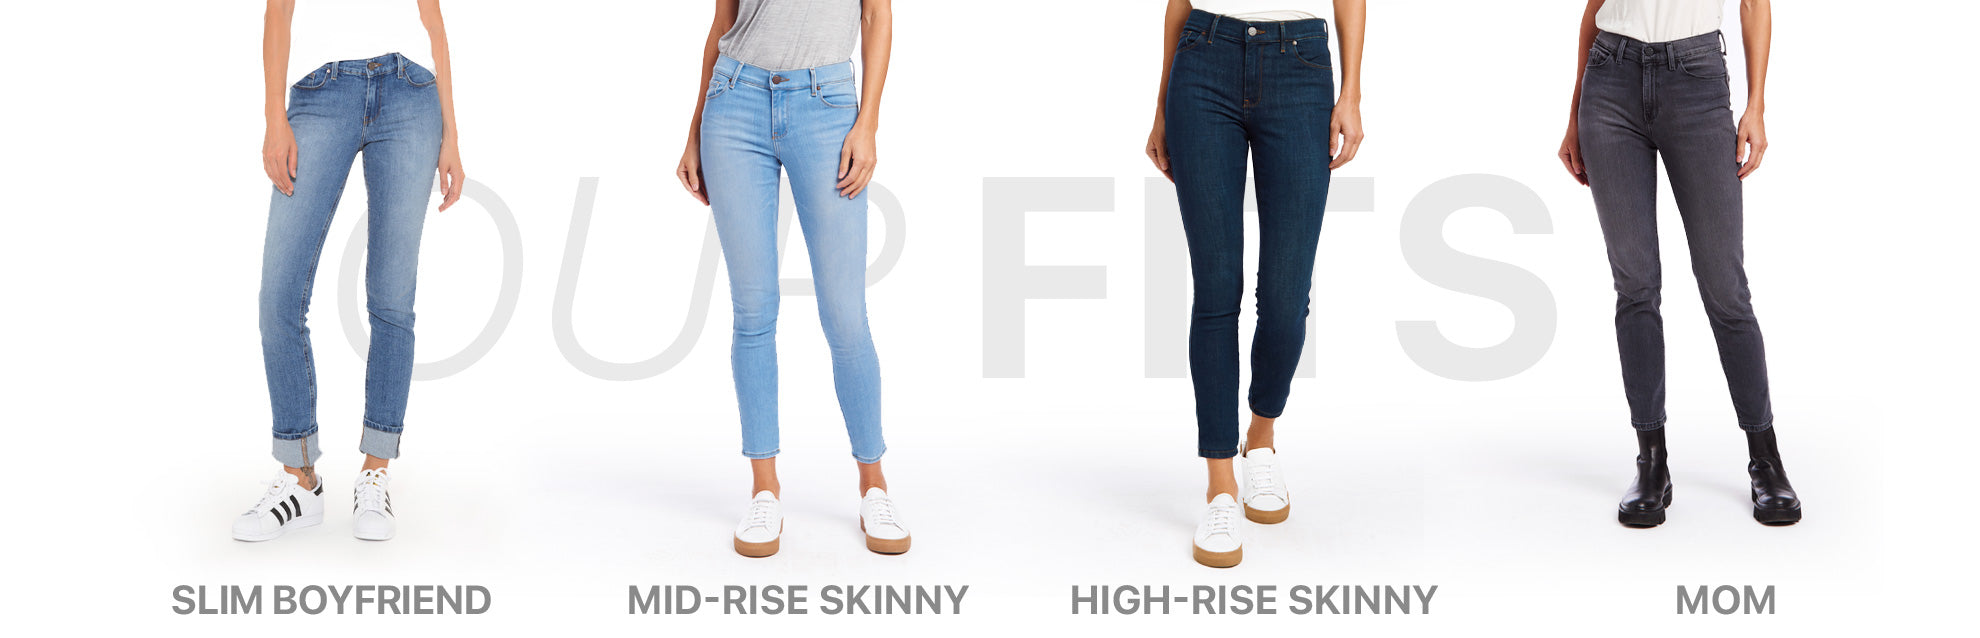 Why Do Black Jeans Fit Differently? (Fashion & Fit Guide